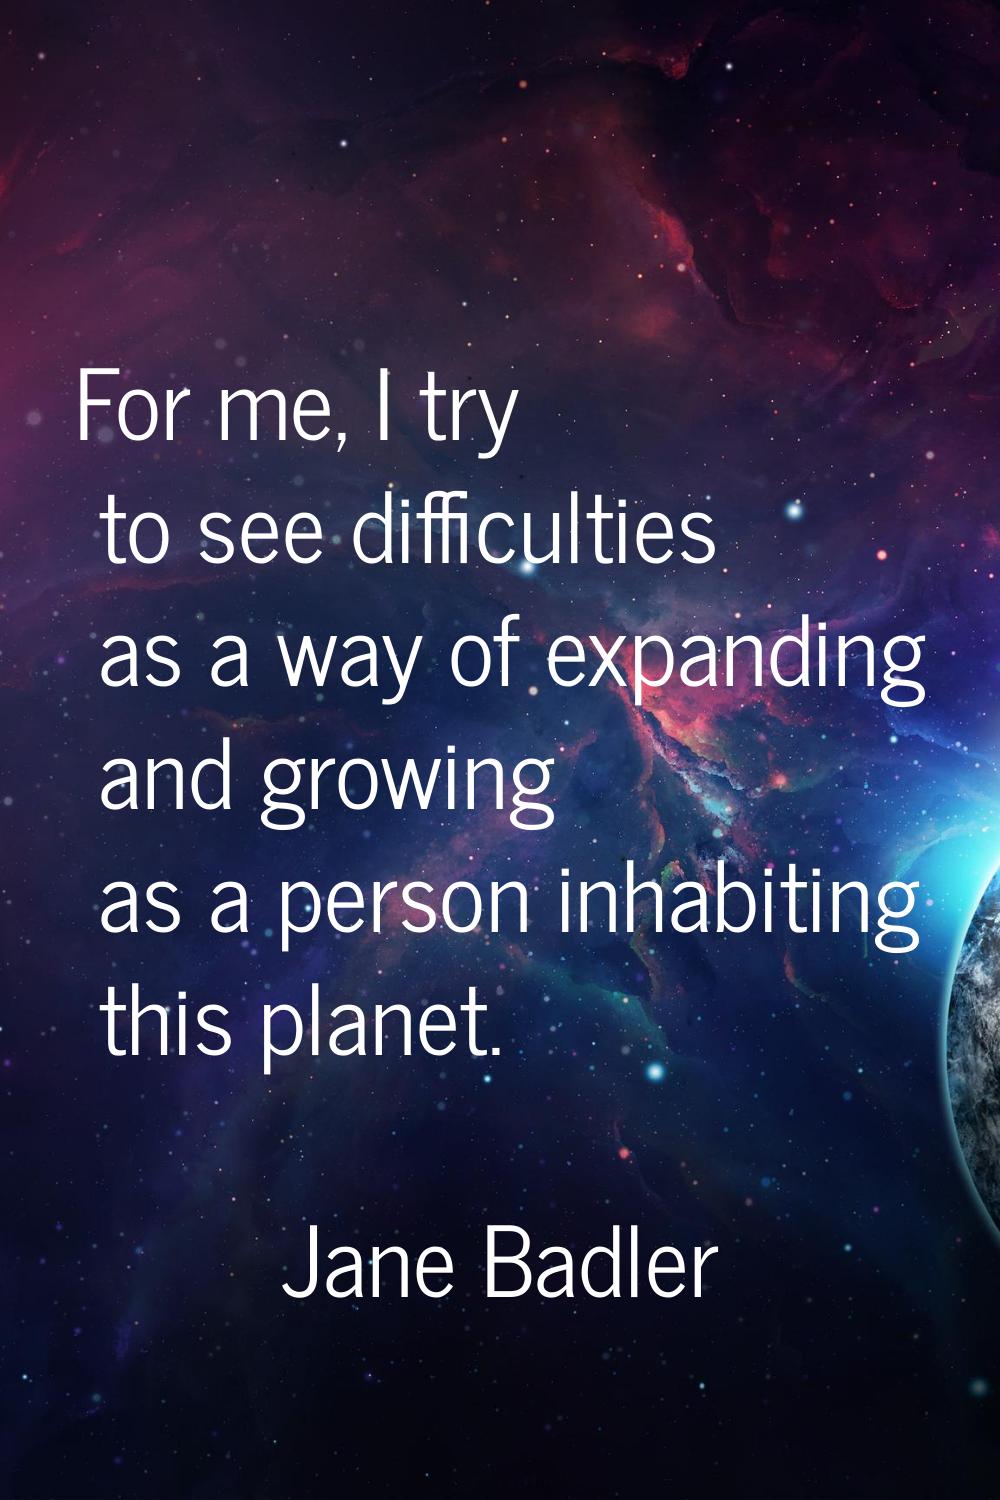 For me, I try to see difficulties as a way of expanding and growing as a person inhabiting this pla